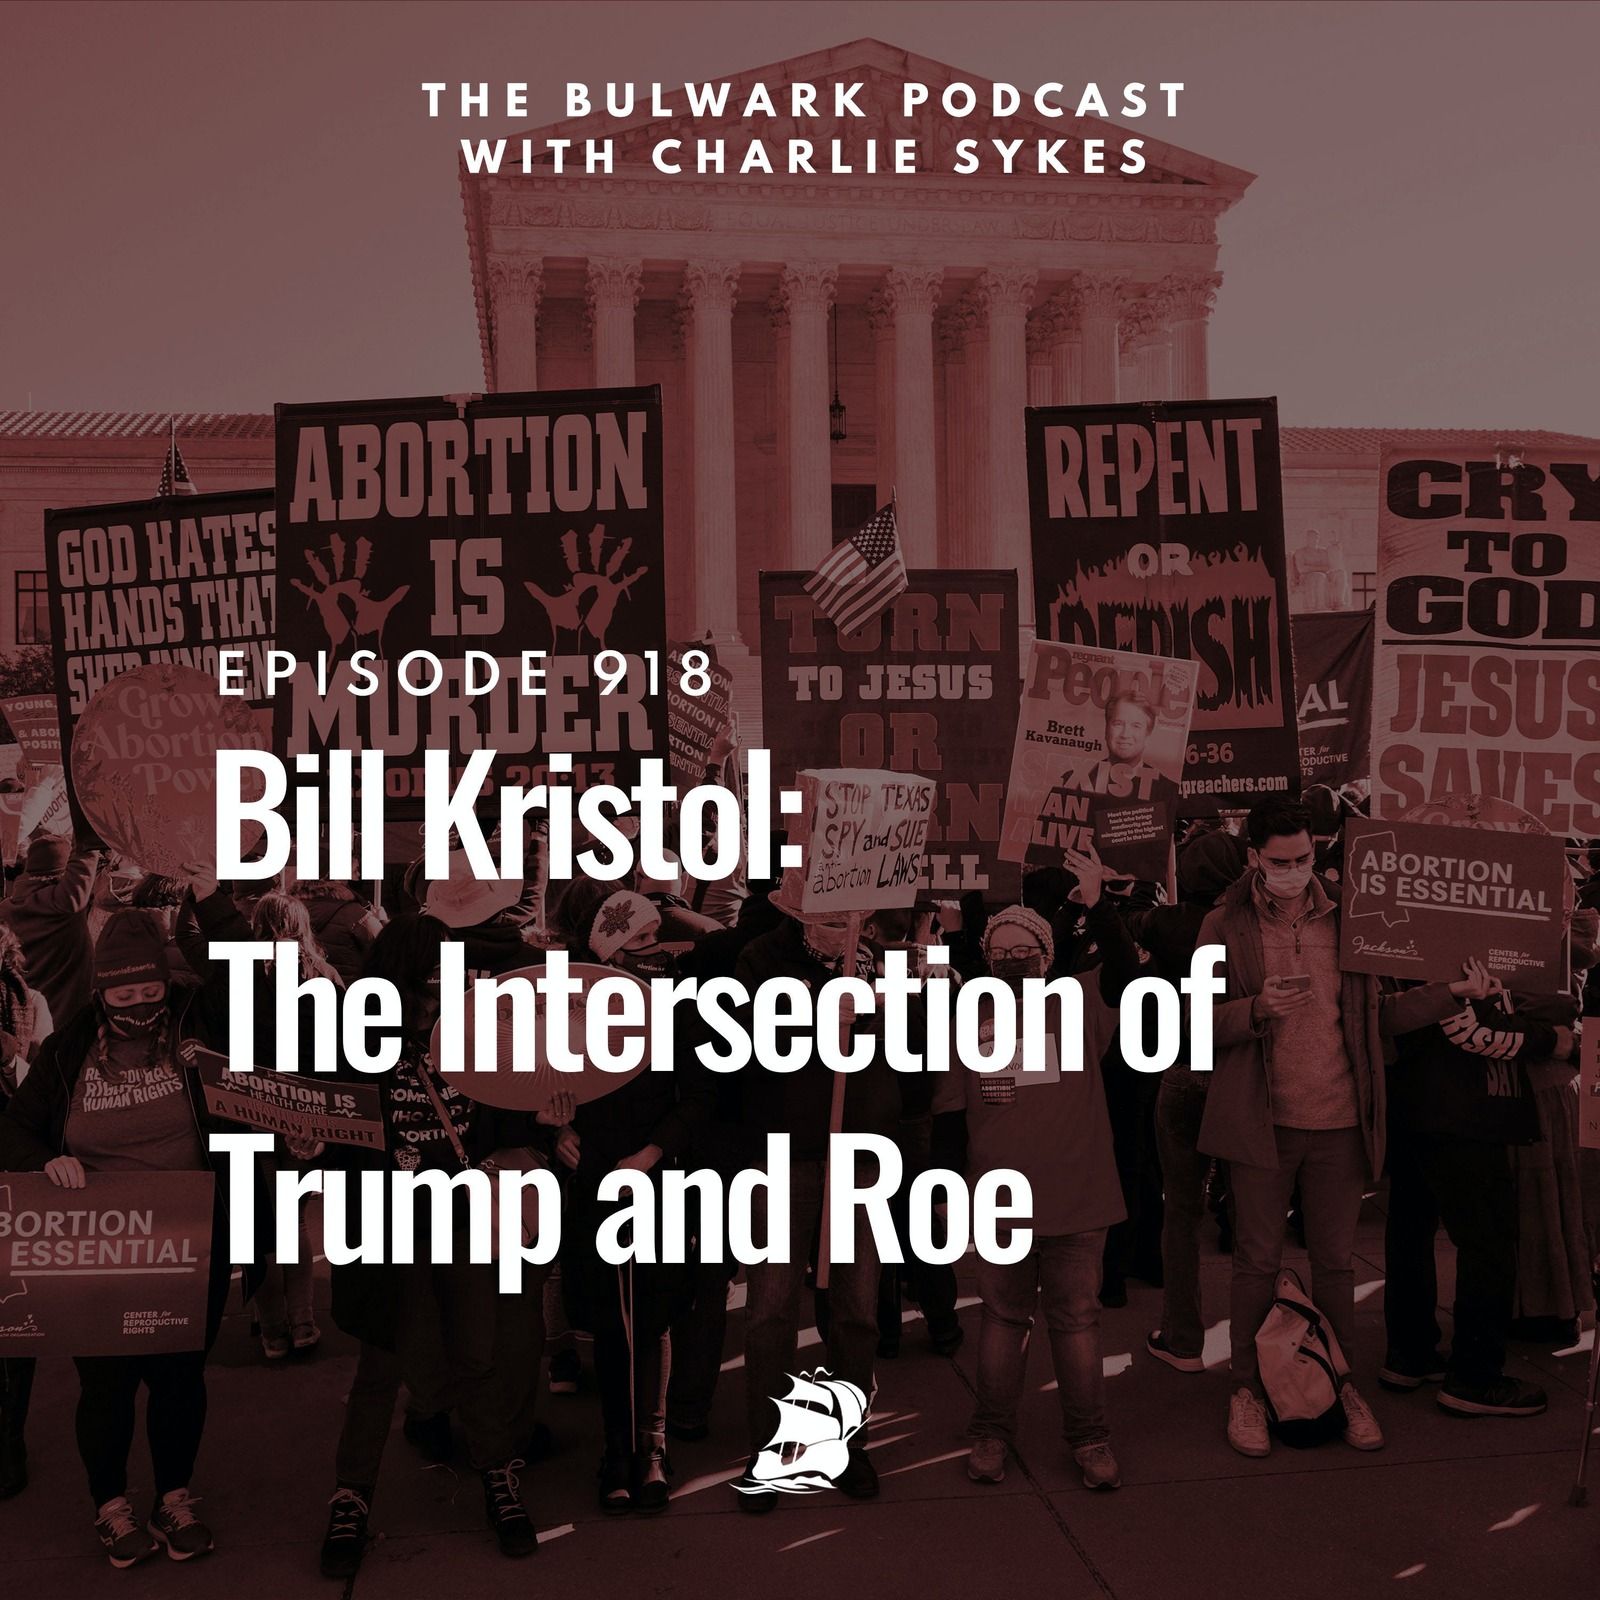 Bill Kristol: The Intersection of Trump and Roe